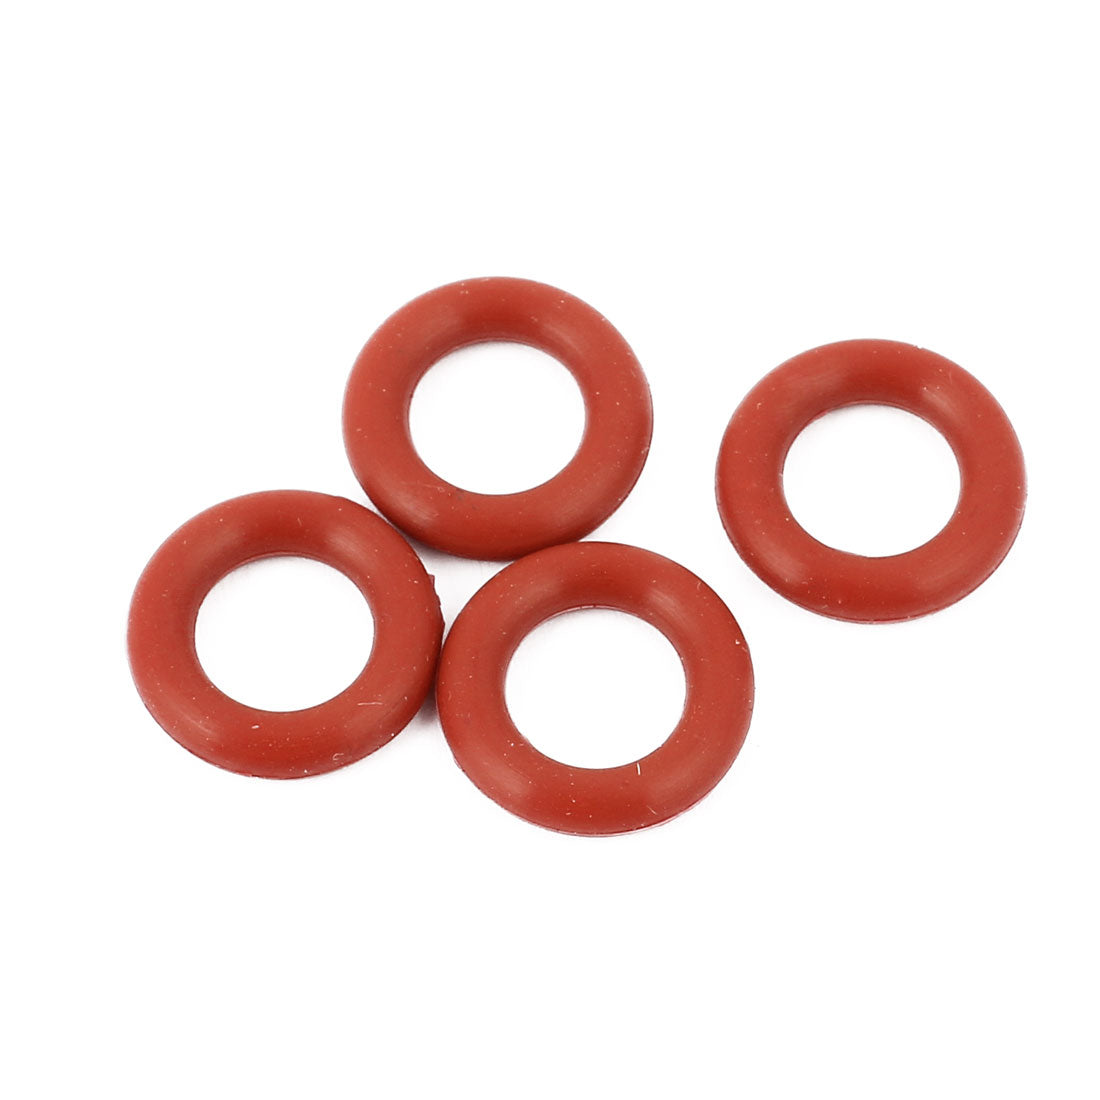 uxcell Uxcell 4pcs 3mm Thick Heat Oil Resistant Mini O-Ring Rubber Sealing Ring 14mm OD Red